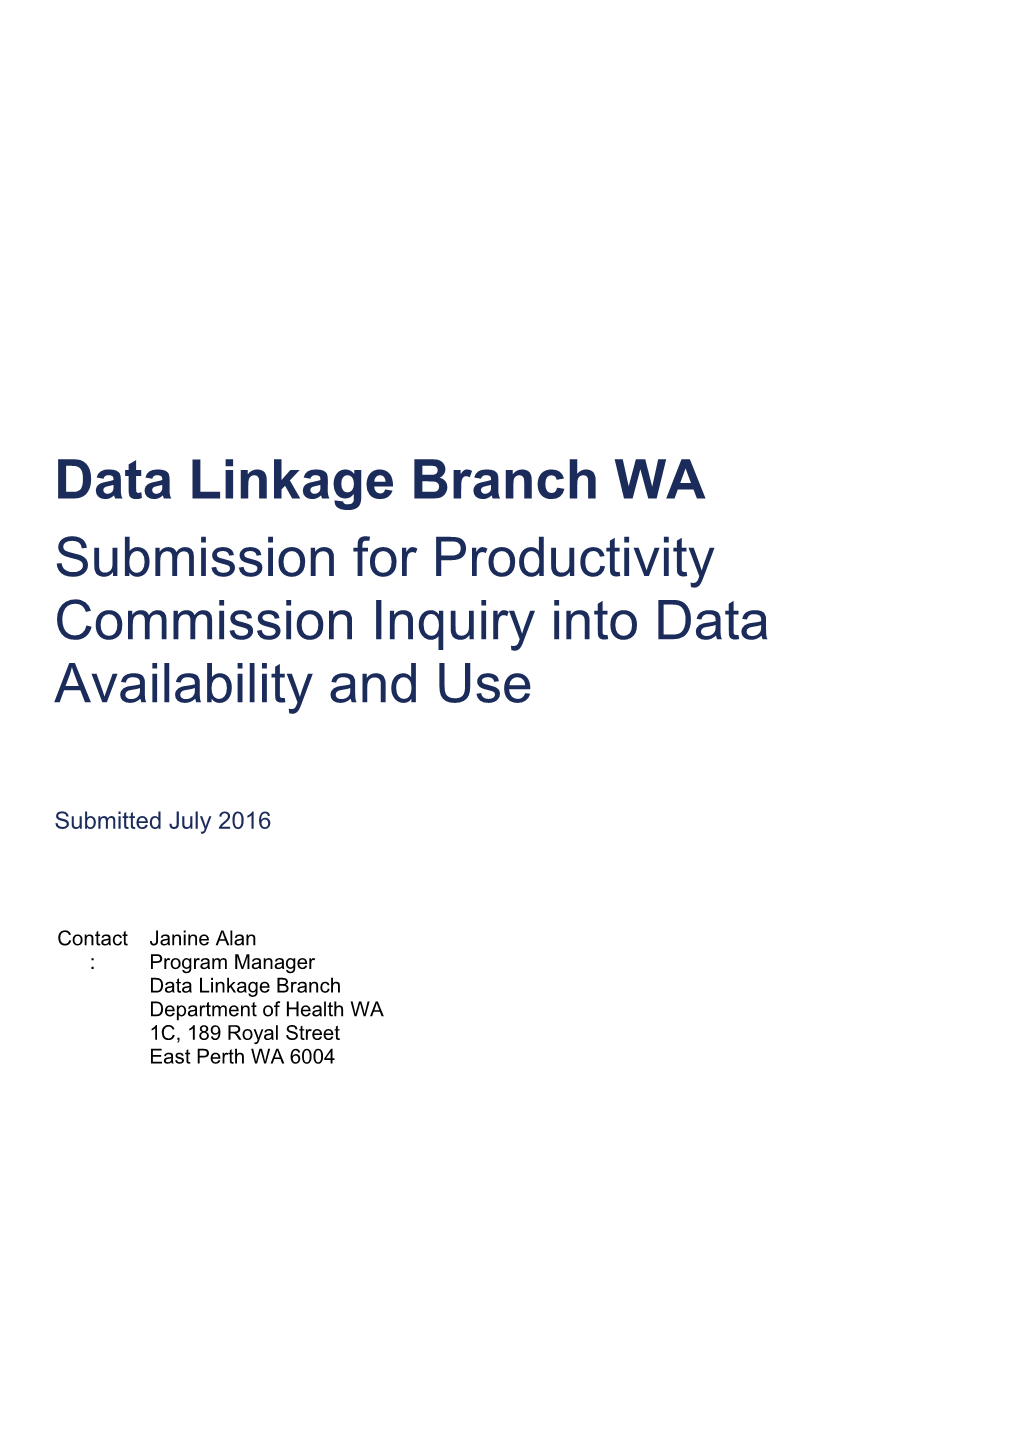 Submission 13 - Data Linkage Branch (Dept of Health WA) - Data Availability and Use - Public